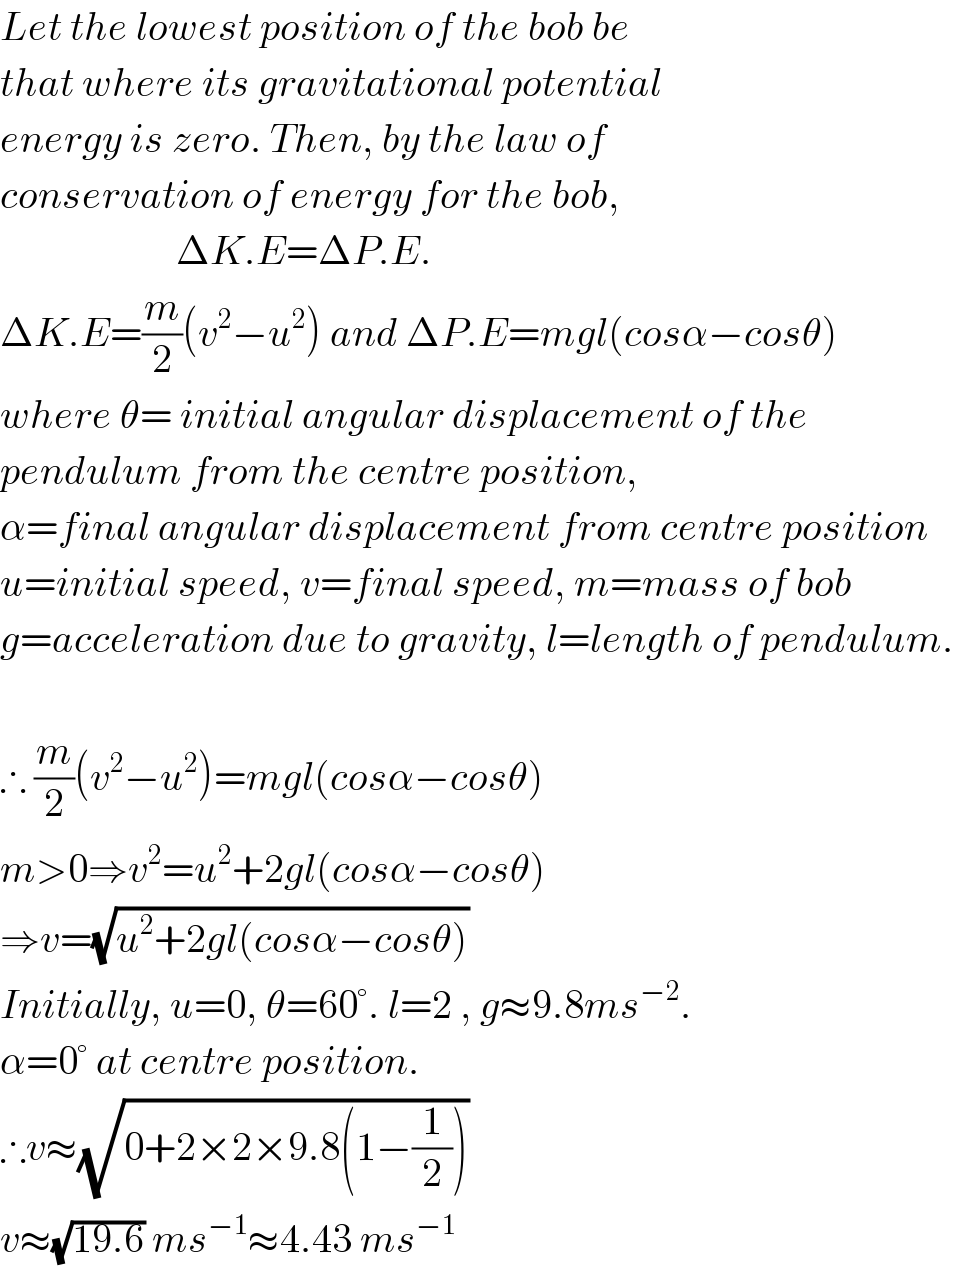 Let the lowest position of the bob be  that where its gravitational potential  energy is zero. Then, by the law of  conservation of energy for the bob,                        ΔK.E=ΔP.E.  ΔK.E=(m/2)(v^2 −u^2 ) and ΔP.E=mgl(cosα−cosθ)  where θ= initial angular displacement of the  pendulum from the centre position,  α=final angular displacement from centre position  u=initial speed, v=final speed, m=mass of bob  g=acceleration due to gravity, l=length of pendulum.    ∴ (m/2)(v^2 −u^2 )=mgl(cosα−cosθ)  m>0⇒v^2 =u^2 +2gl(cosα−cosθ)  ⇒v=(√(u^2 +2gl(cosα−cosθ)))  Initially, u=0, θ=60°. l=2 , g≈9.8ms^(−2) .  α=0° at centre position.  ∴v≈(√(0+2×2×9.8(1−(1/2))))  v≈(√(19.6)) ms^(−1) ≈4.43 ms^(−1)   